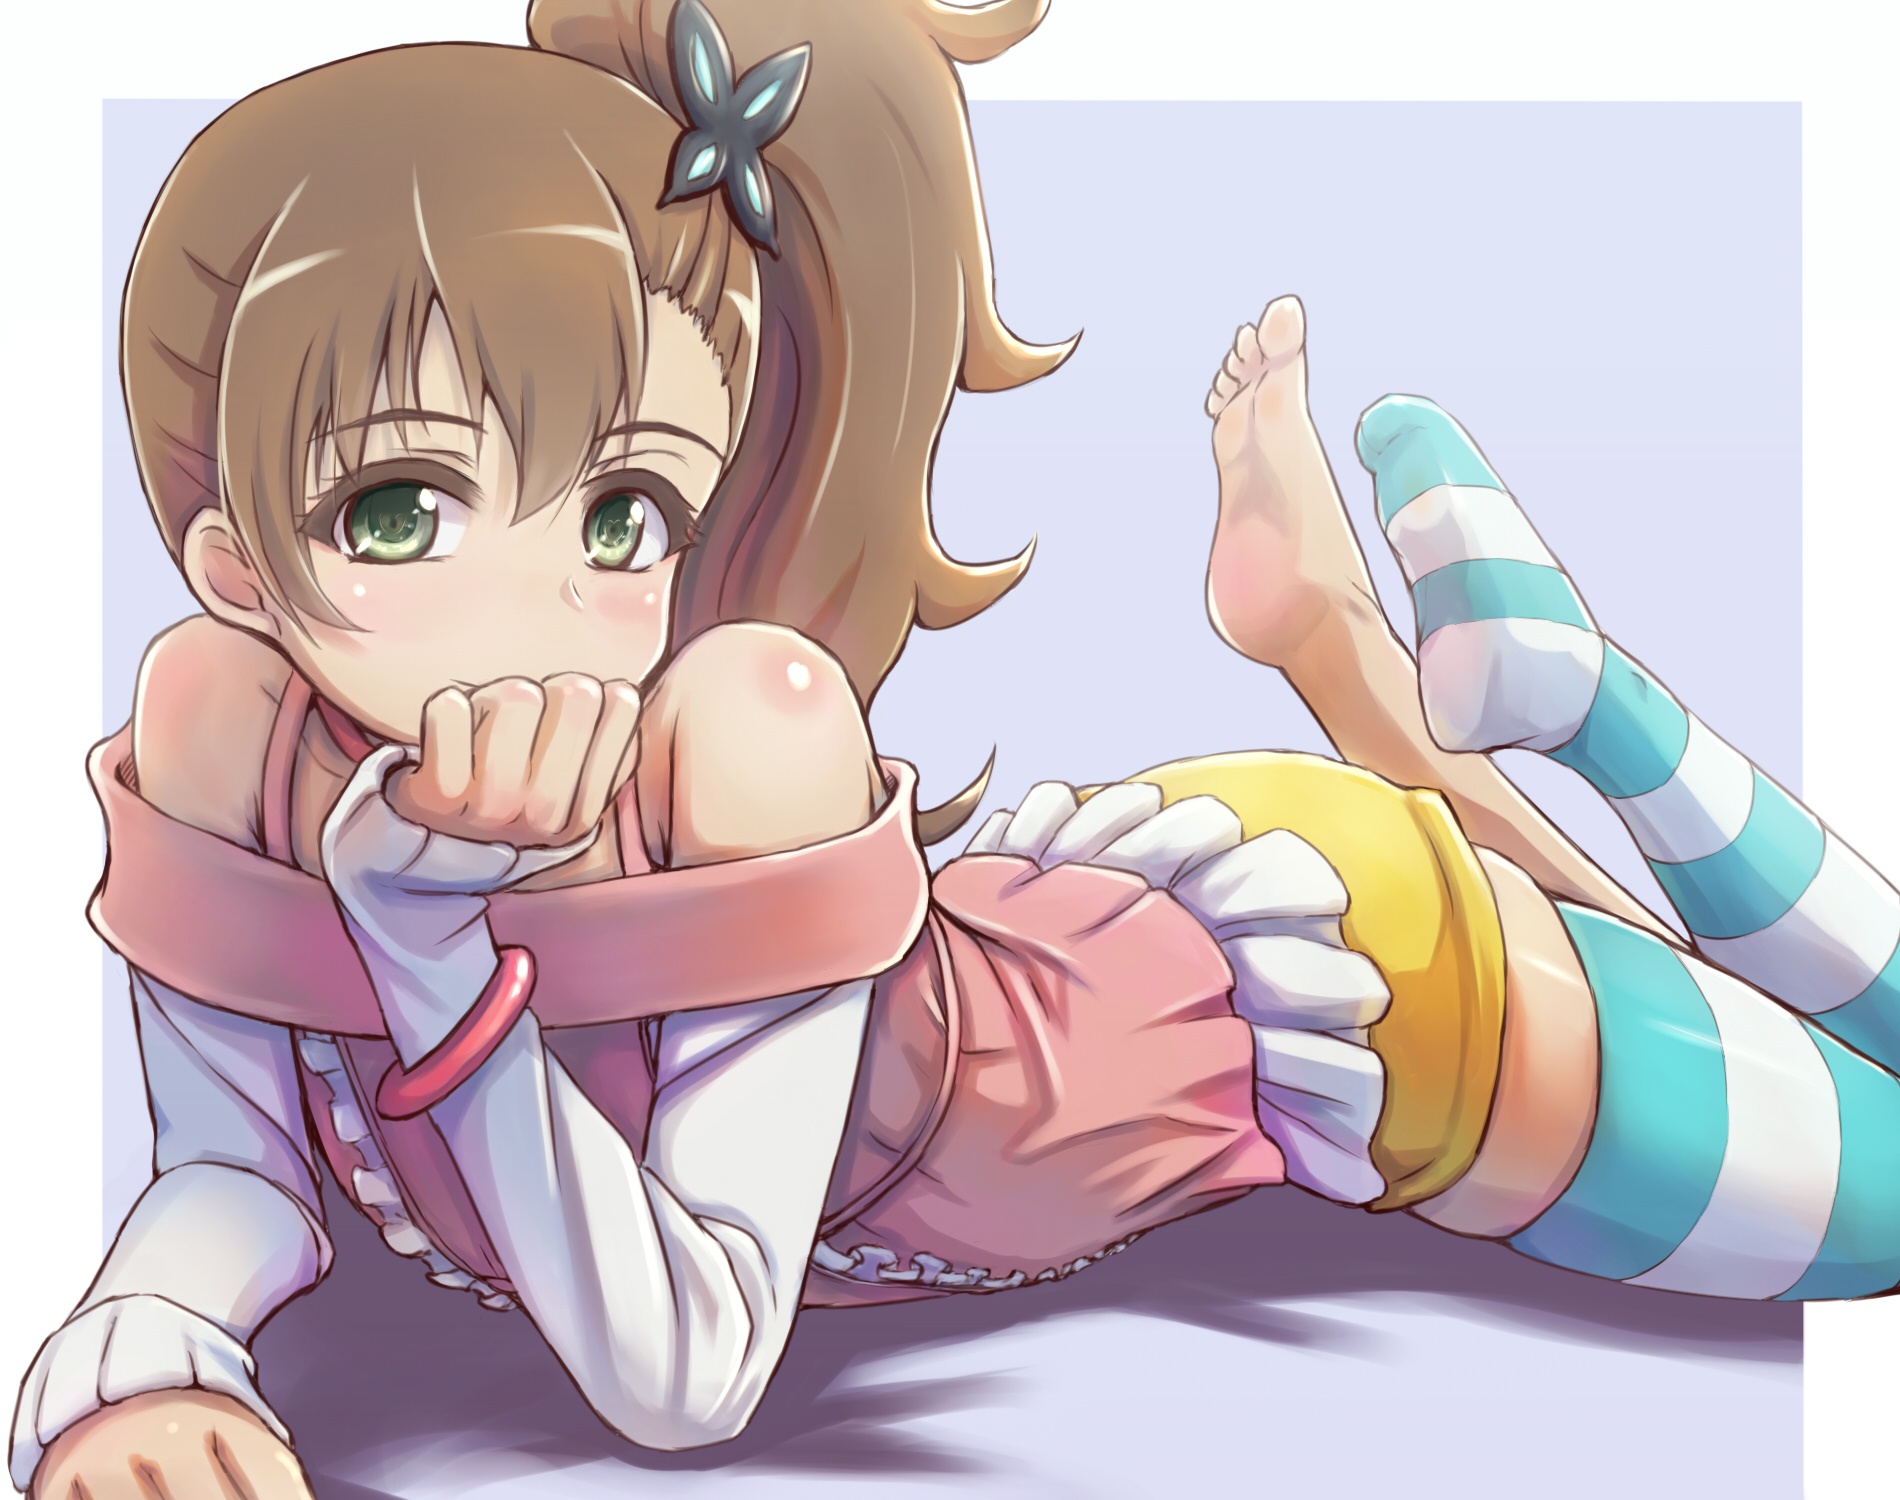 Chousoku, Henkei, Gyrozetter, Inaba, Rinne, barefoot, blush, brown, hair, green, eyes, hairpins, long, shorts, side, tail, smile, thigh, highs, , , anime, picture, , |, , , pictures